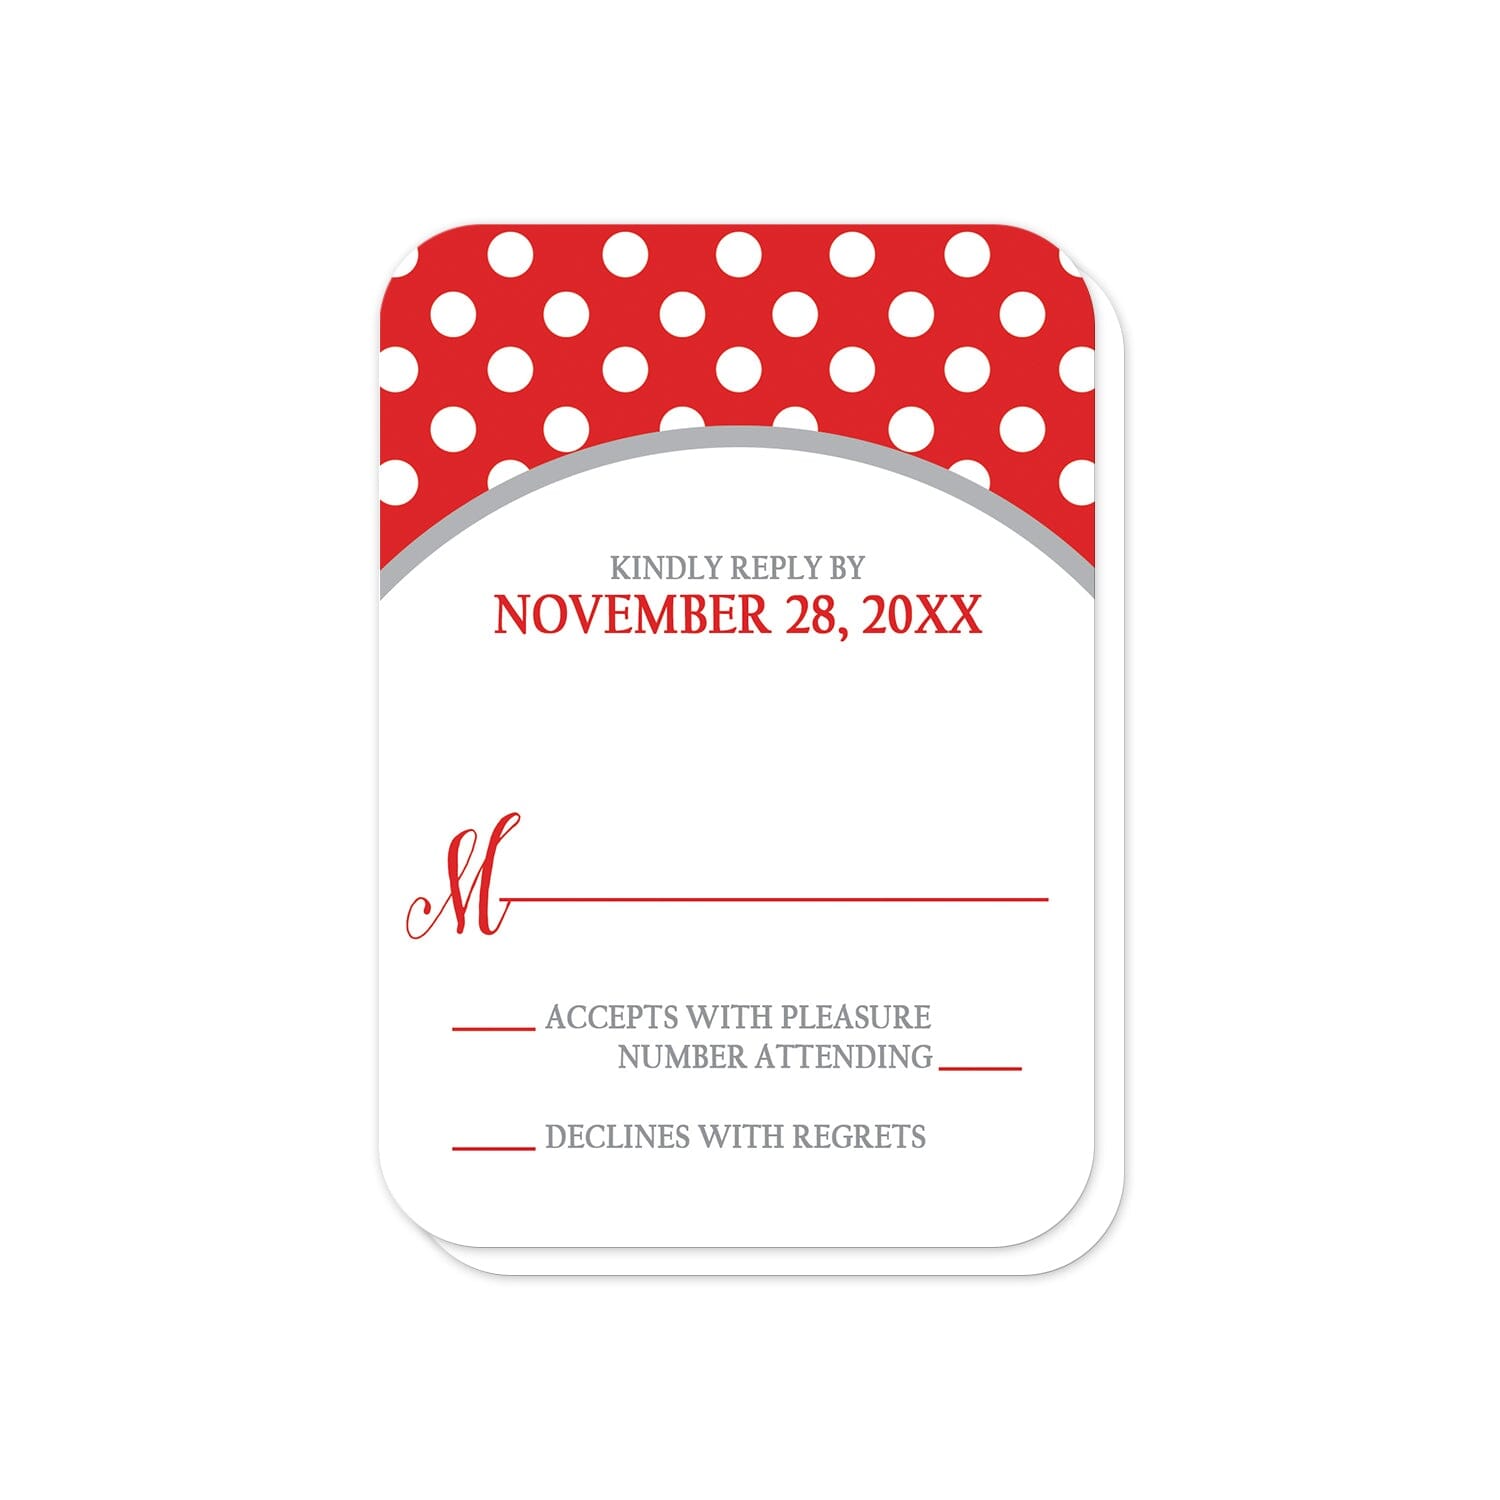 Gray and Red Polka Dot RSVP Cards (with rounded corners) at Artistically Invited.